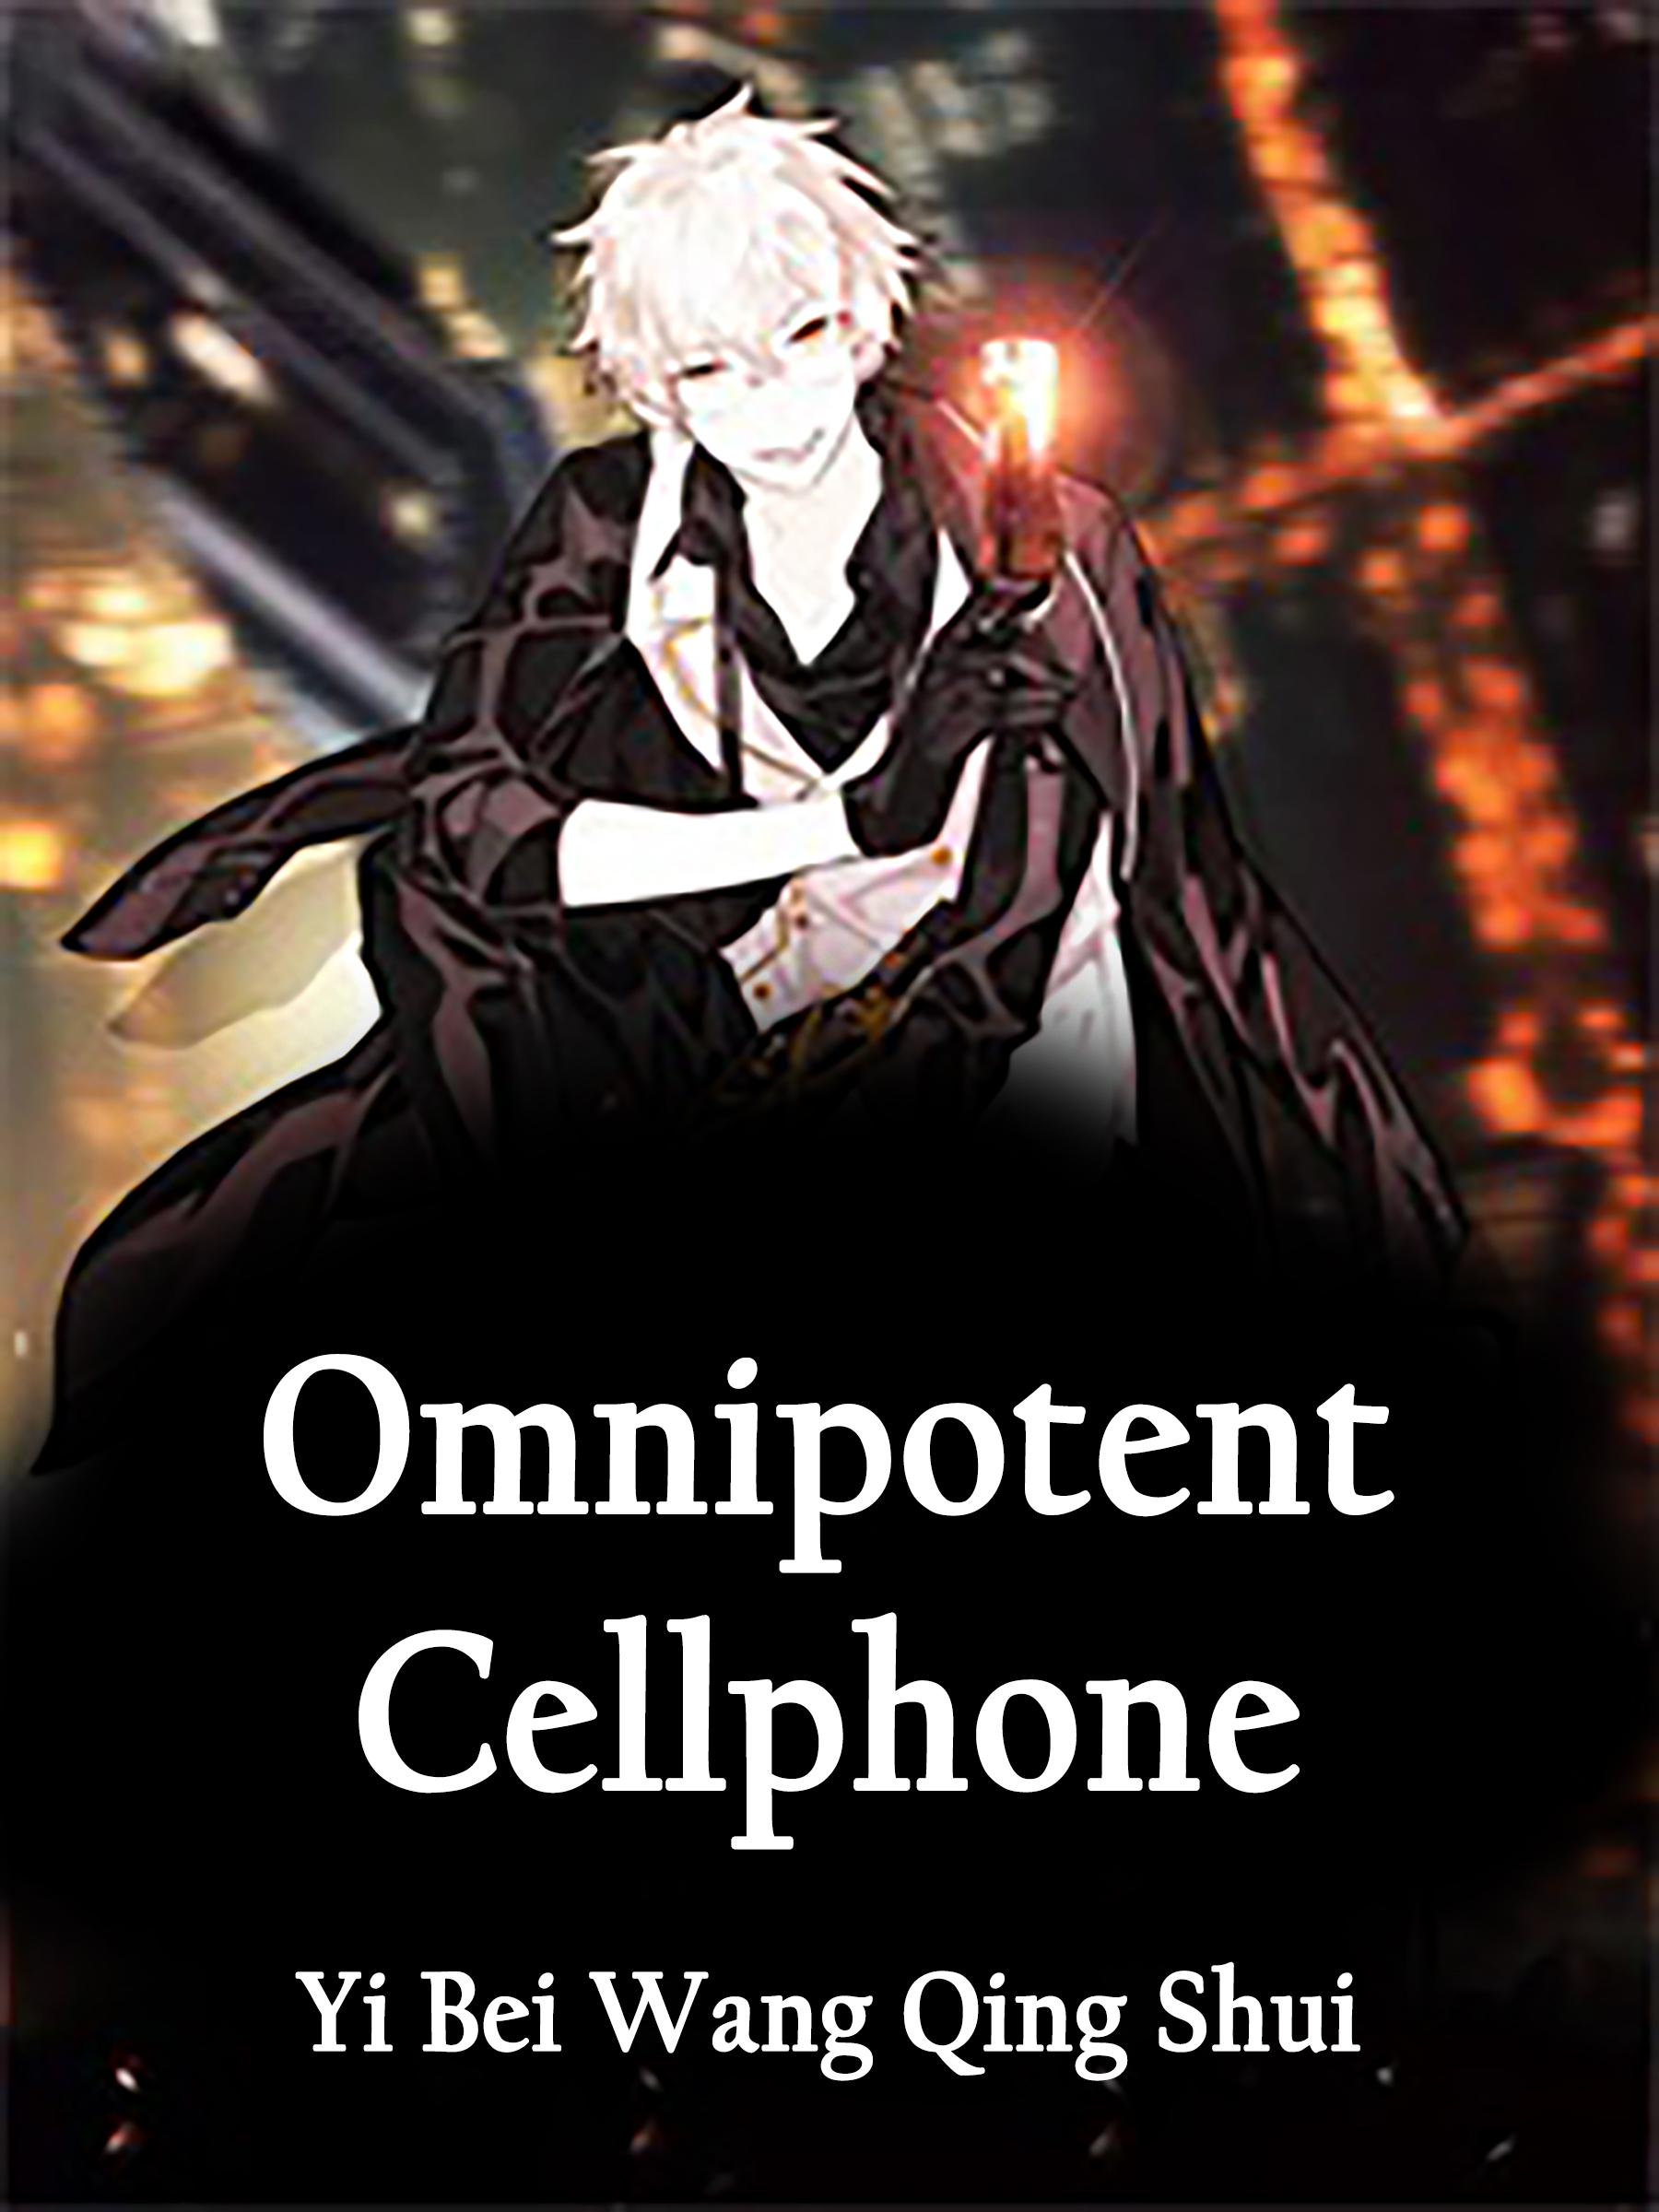 Omnipotent Cellphone